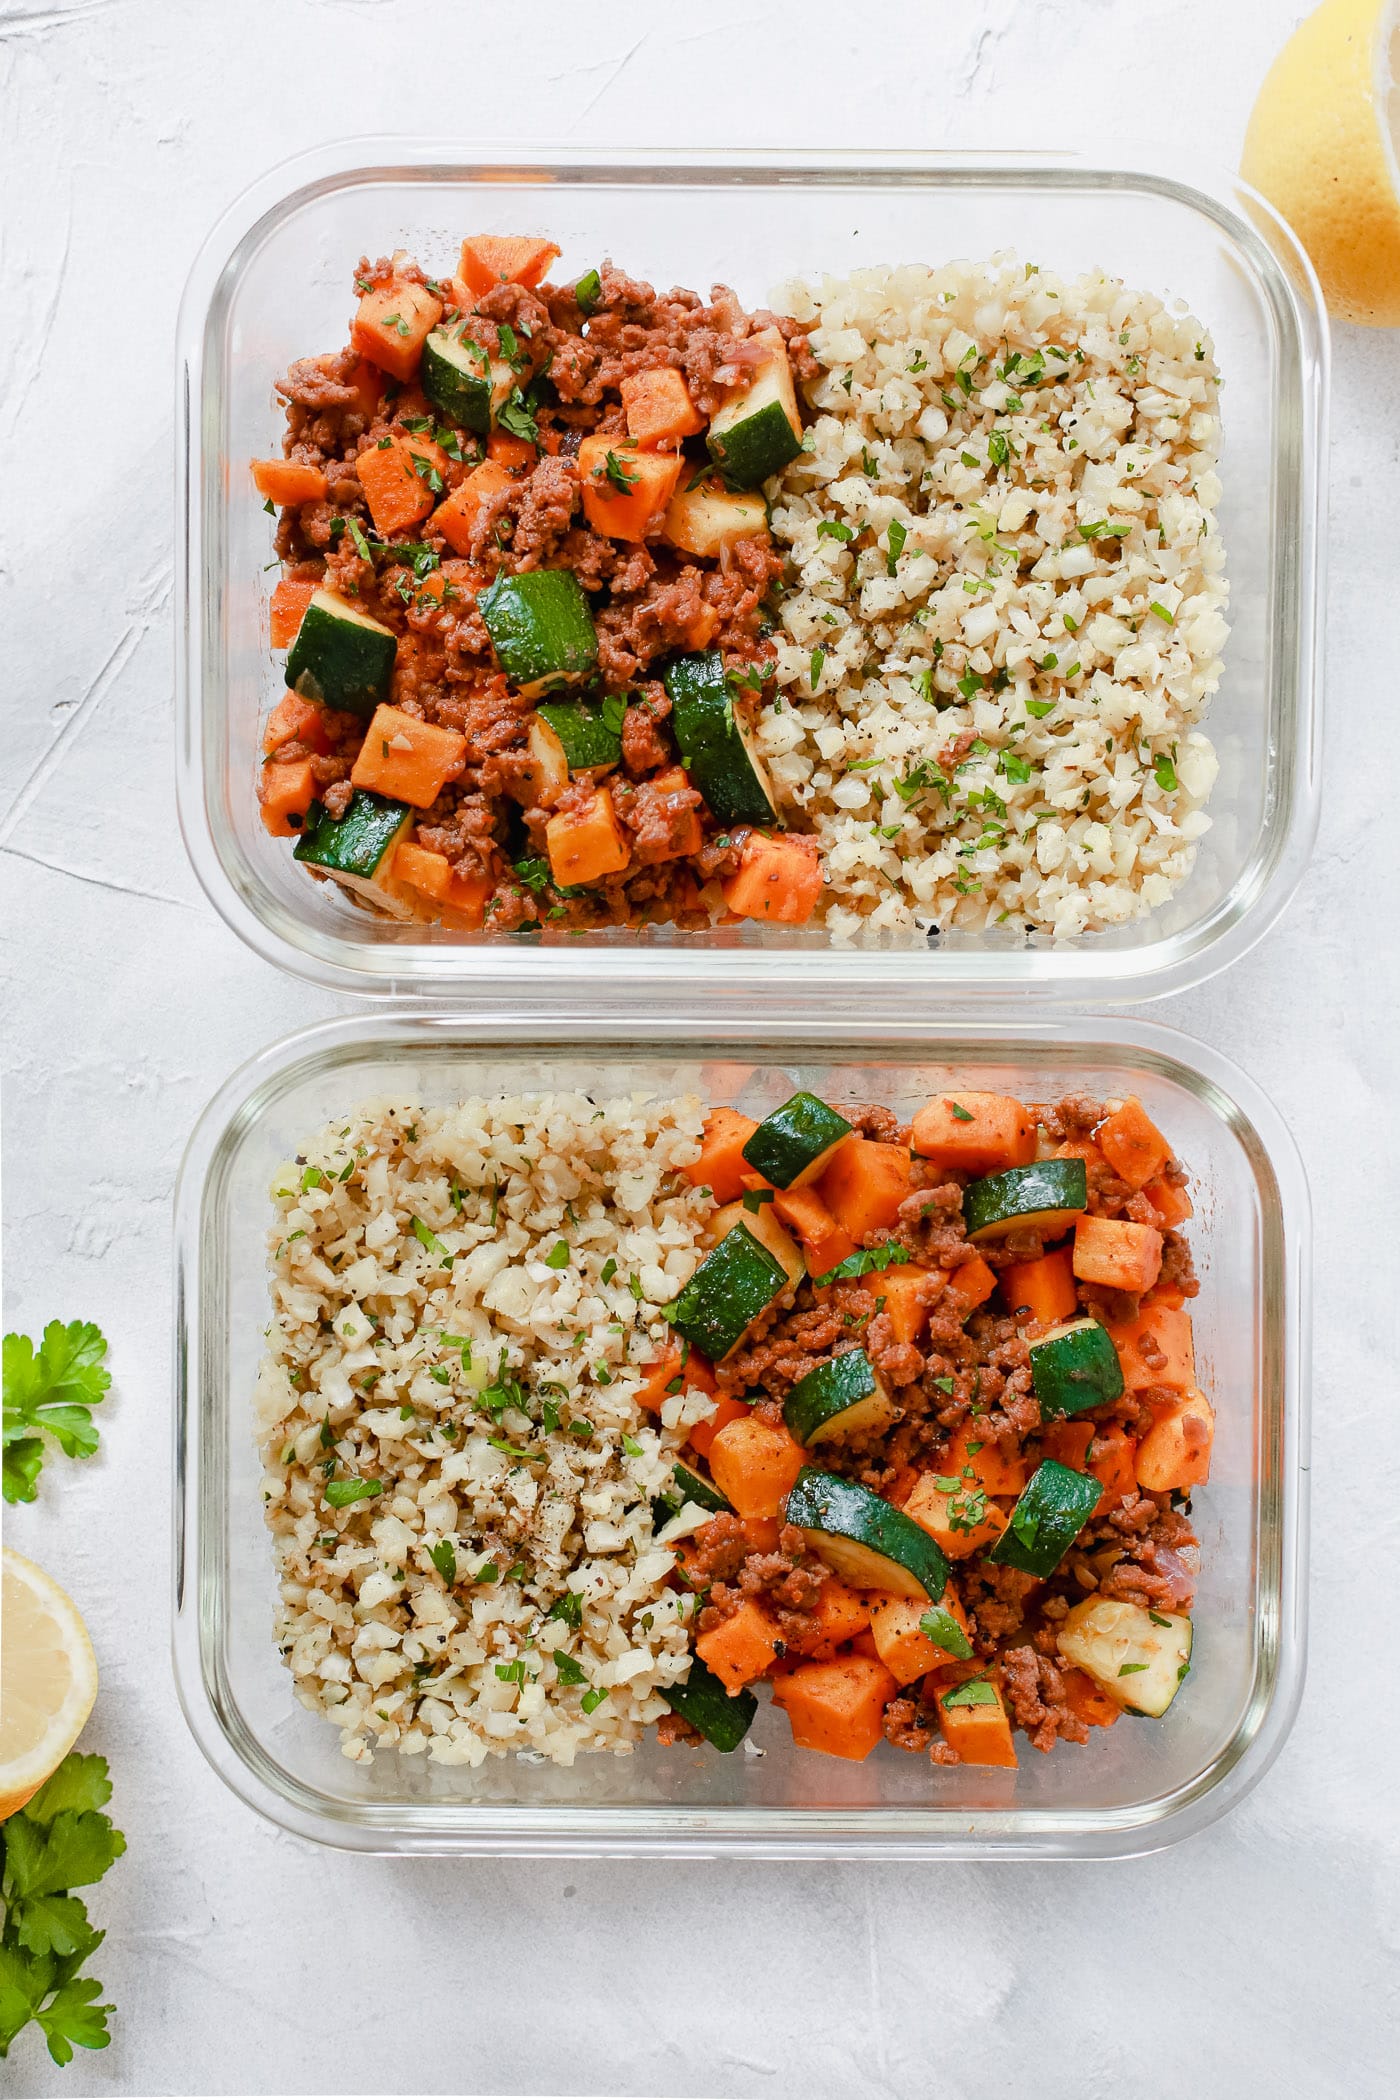 15 Easy Whole30 Meal-Prep Recipes